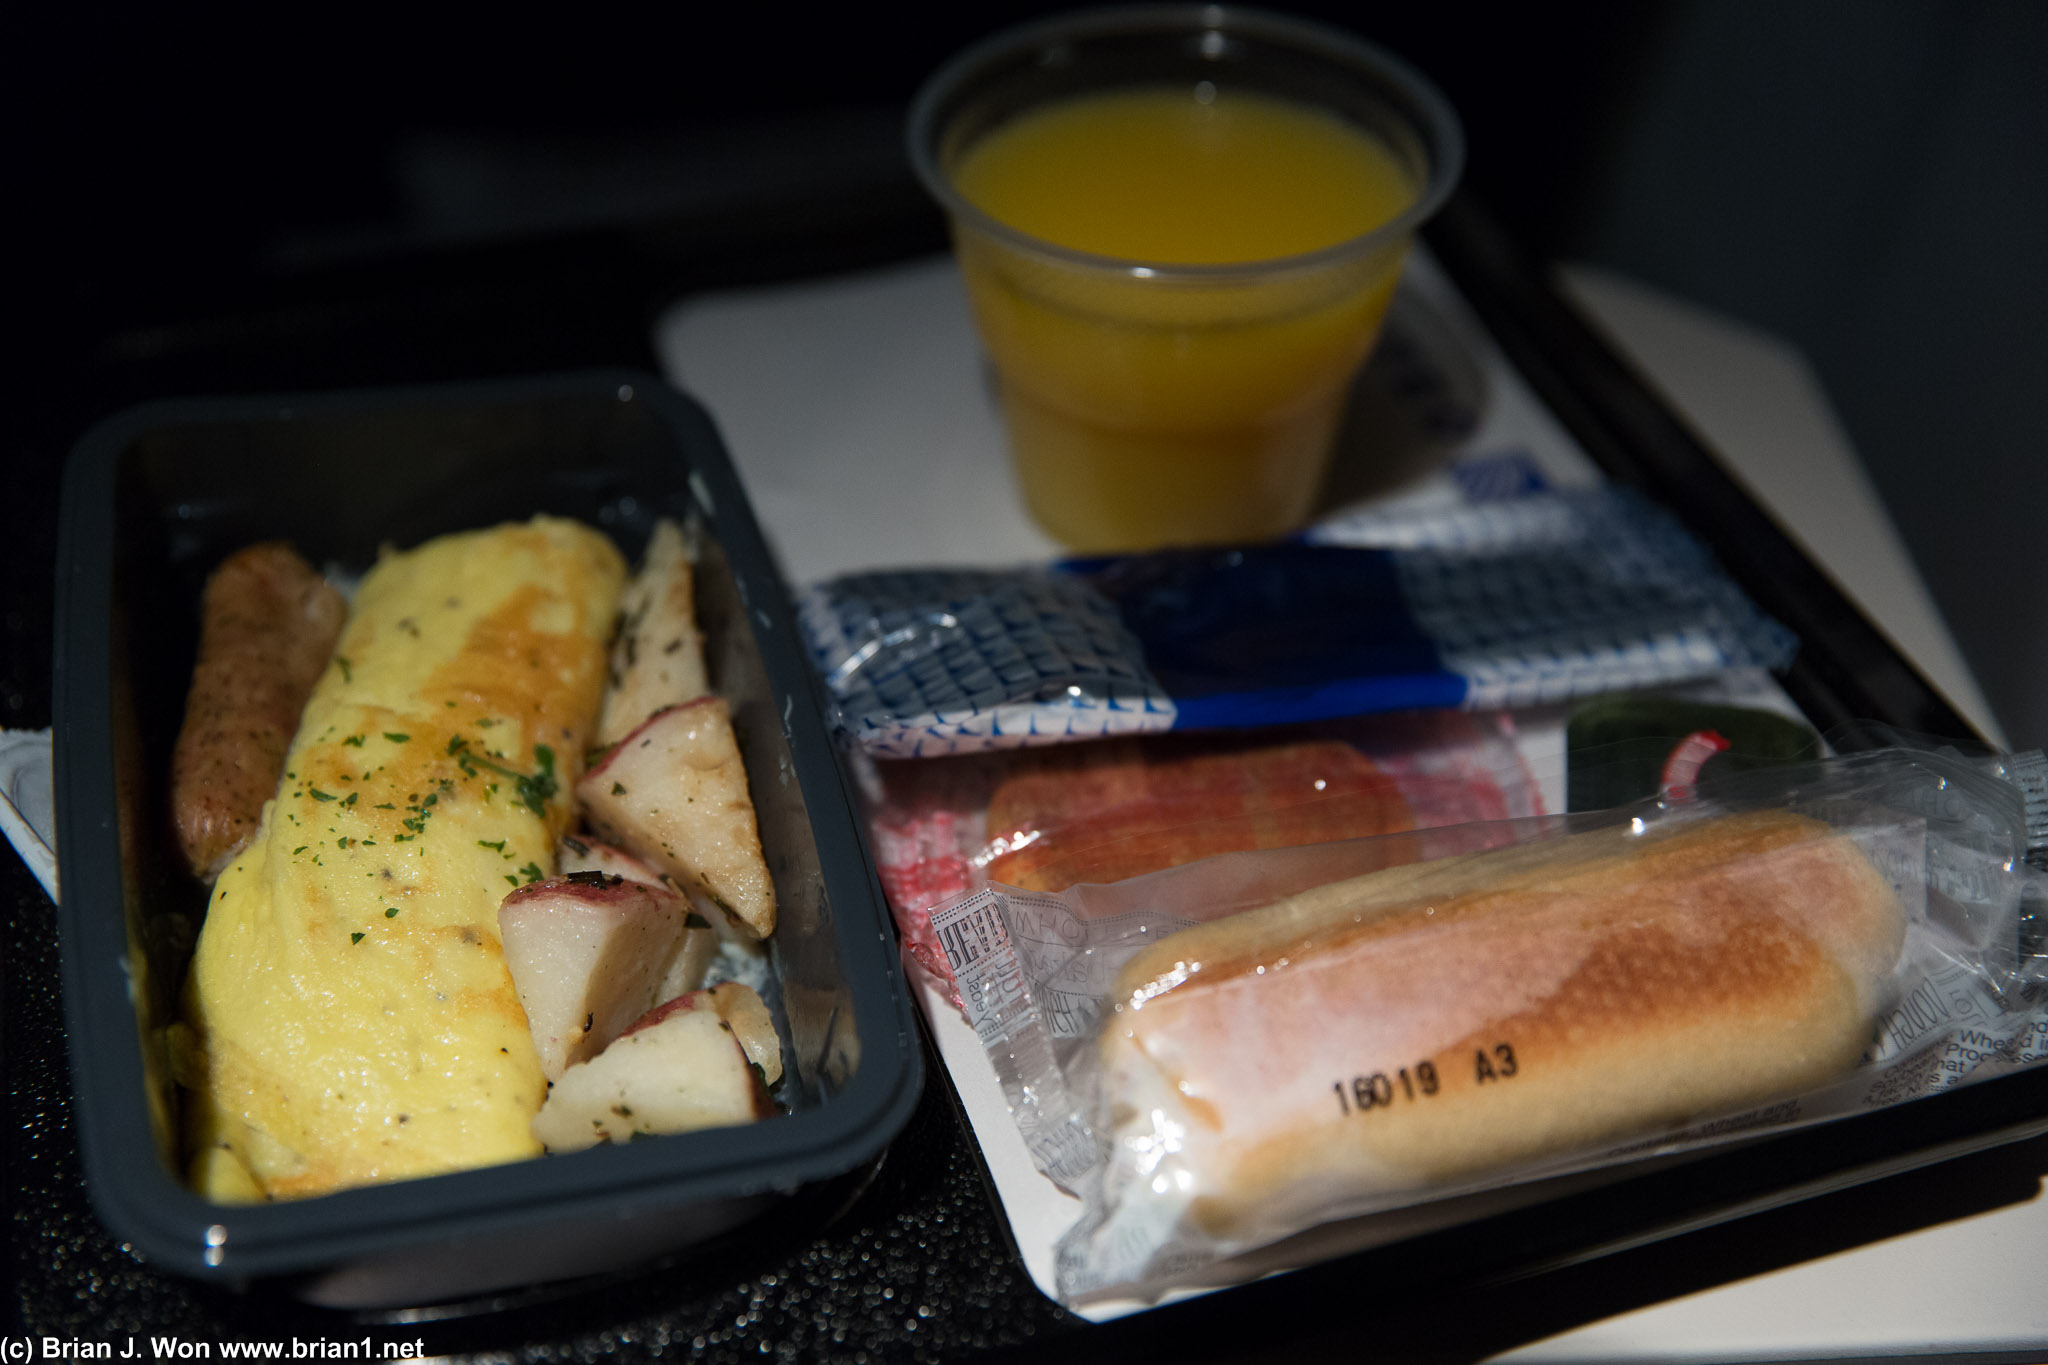 Breakfast on this old United 747-400 was gross. But edible.